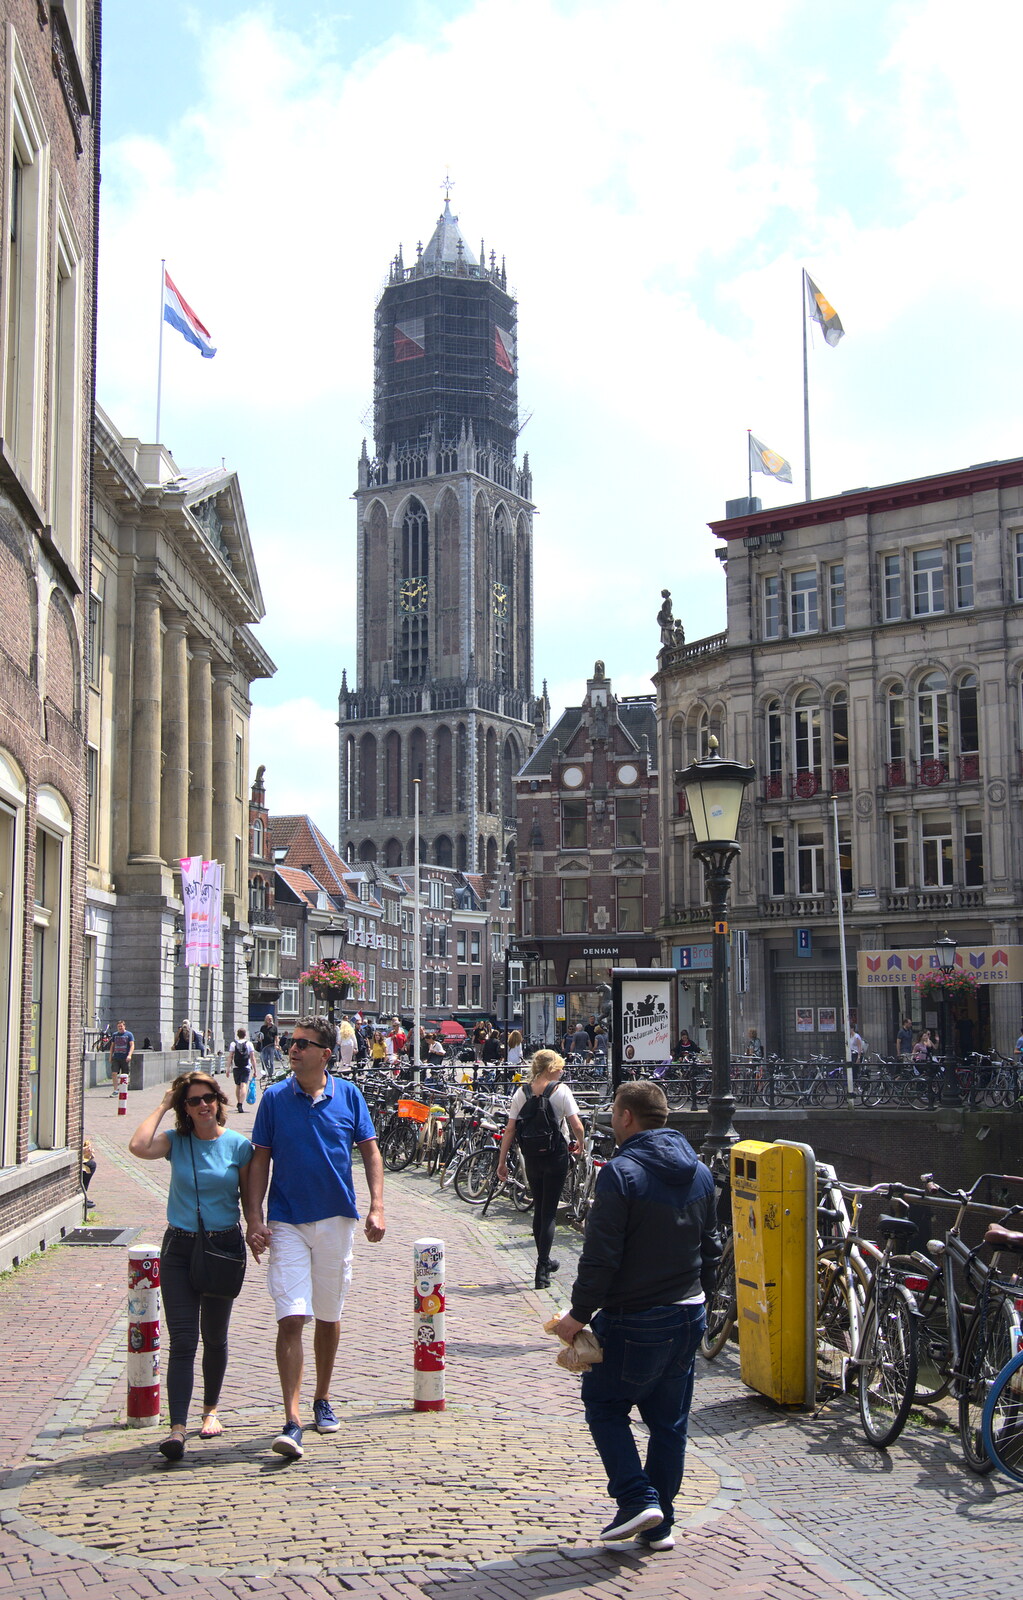 The famous Domtoren, or Dom Tower of Utrecht from A Postcard from Utrecht, Nederlands - 10th June 2018